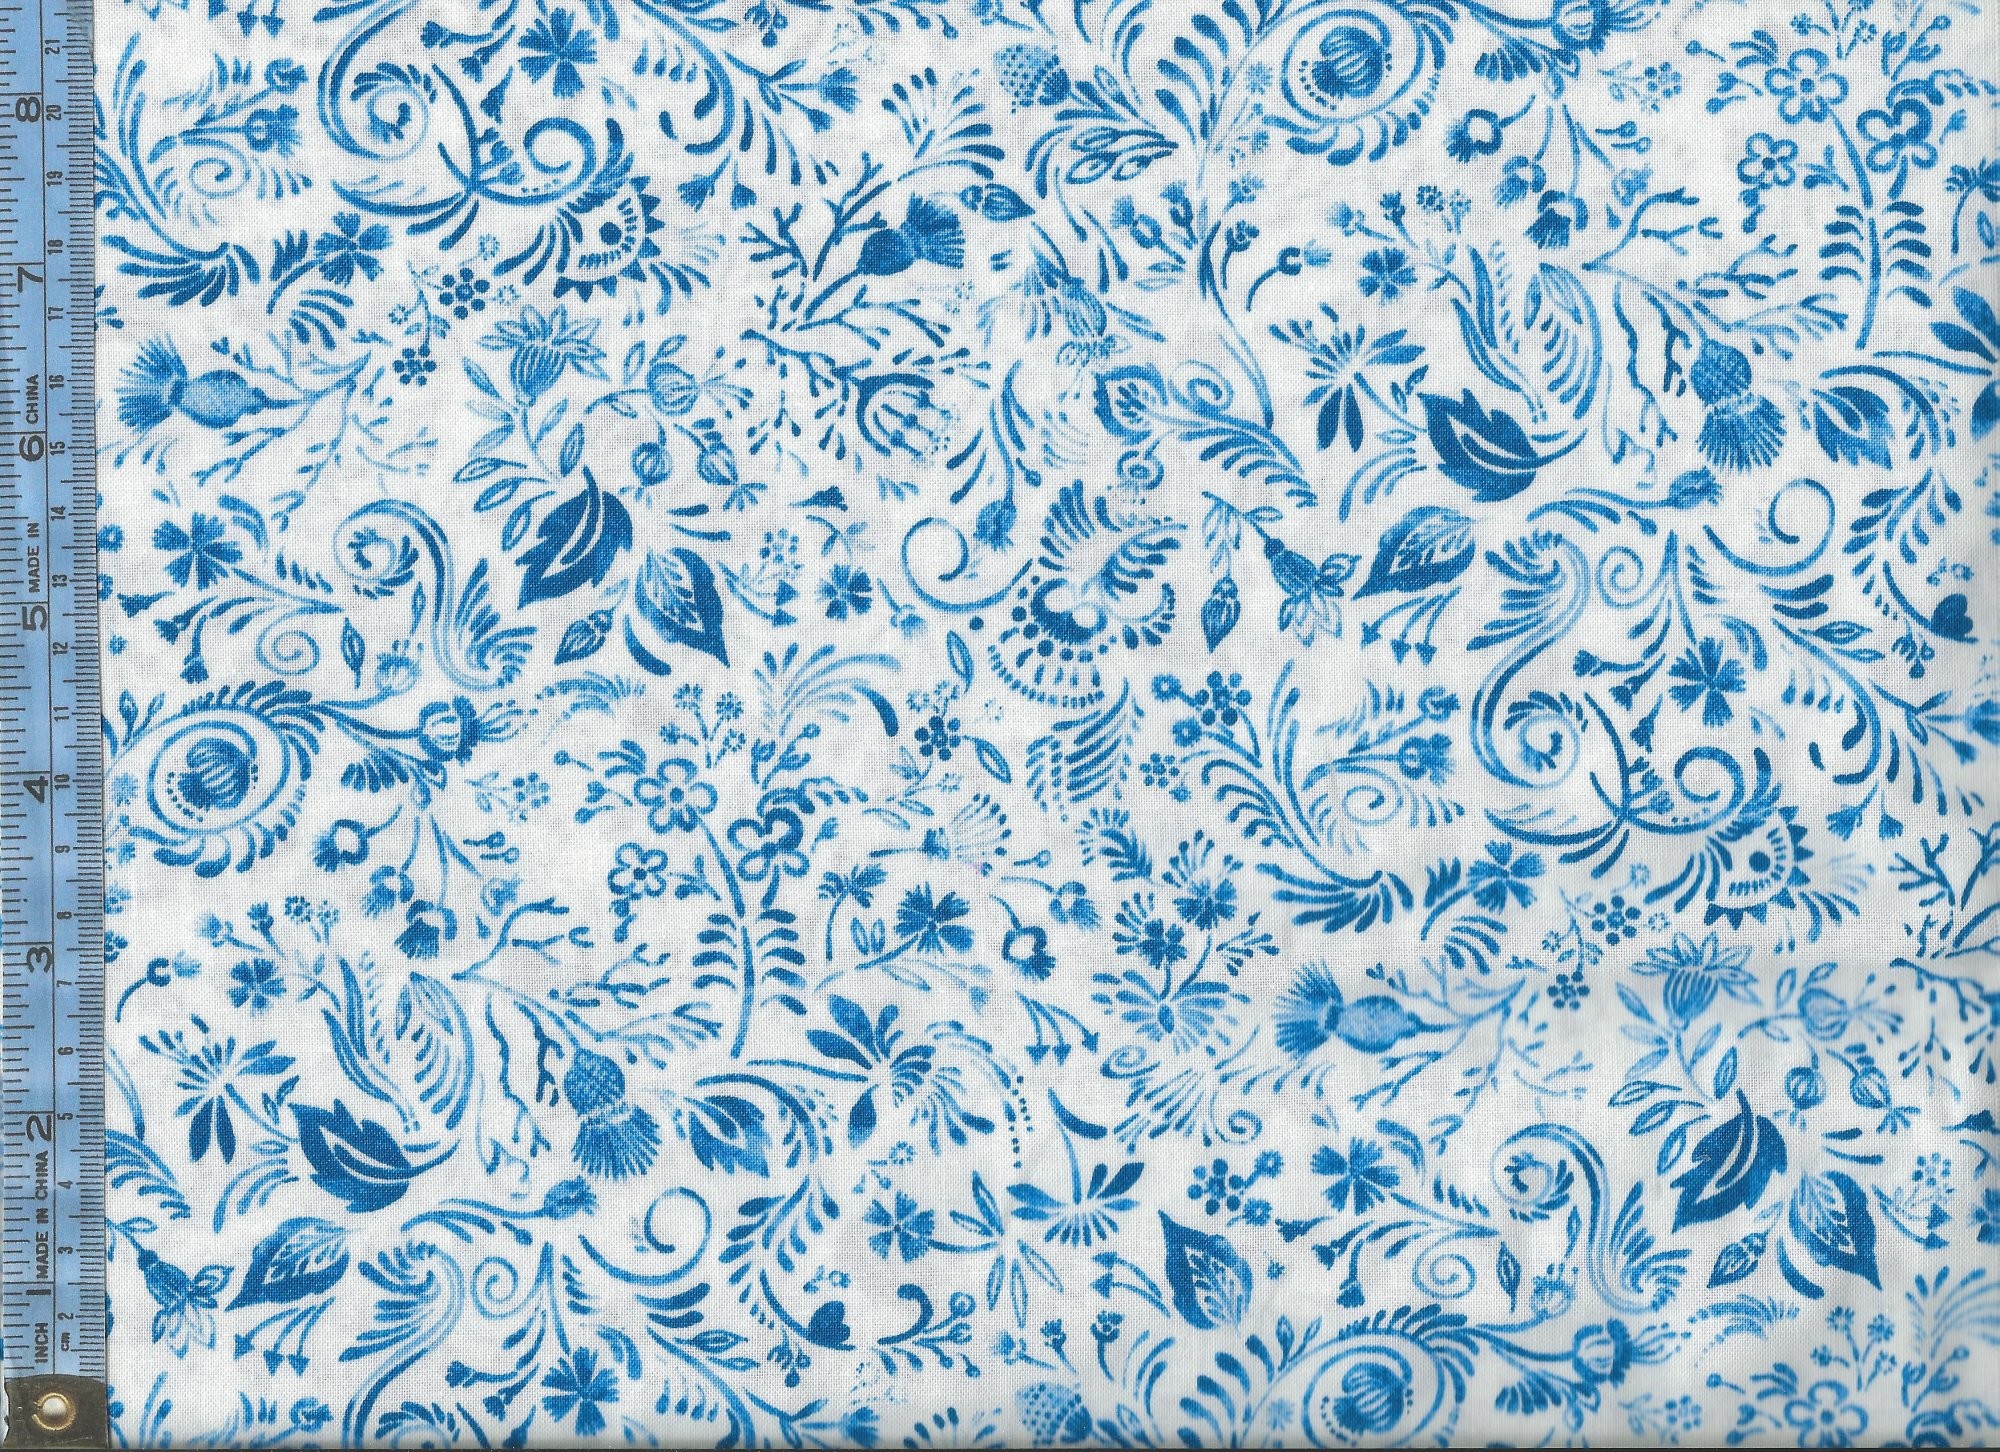 Flow Blue Garden – navy blue floral and leaves on white background